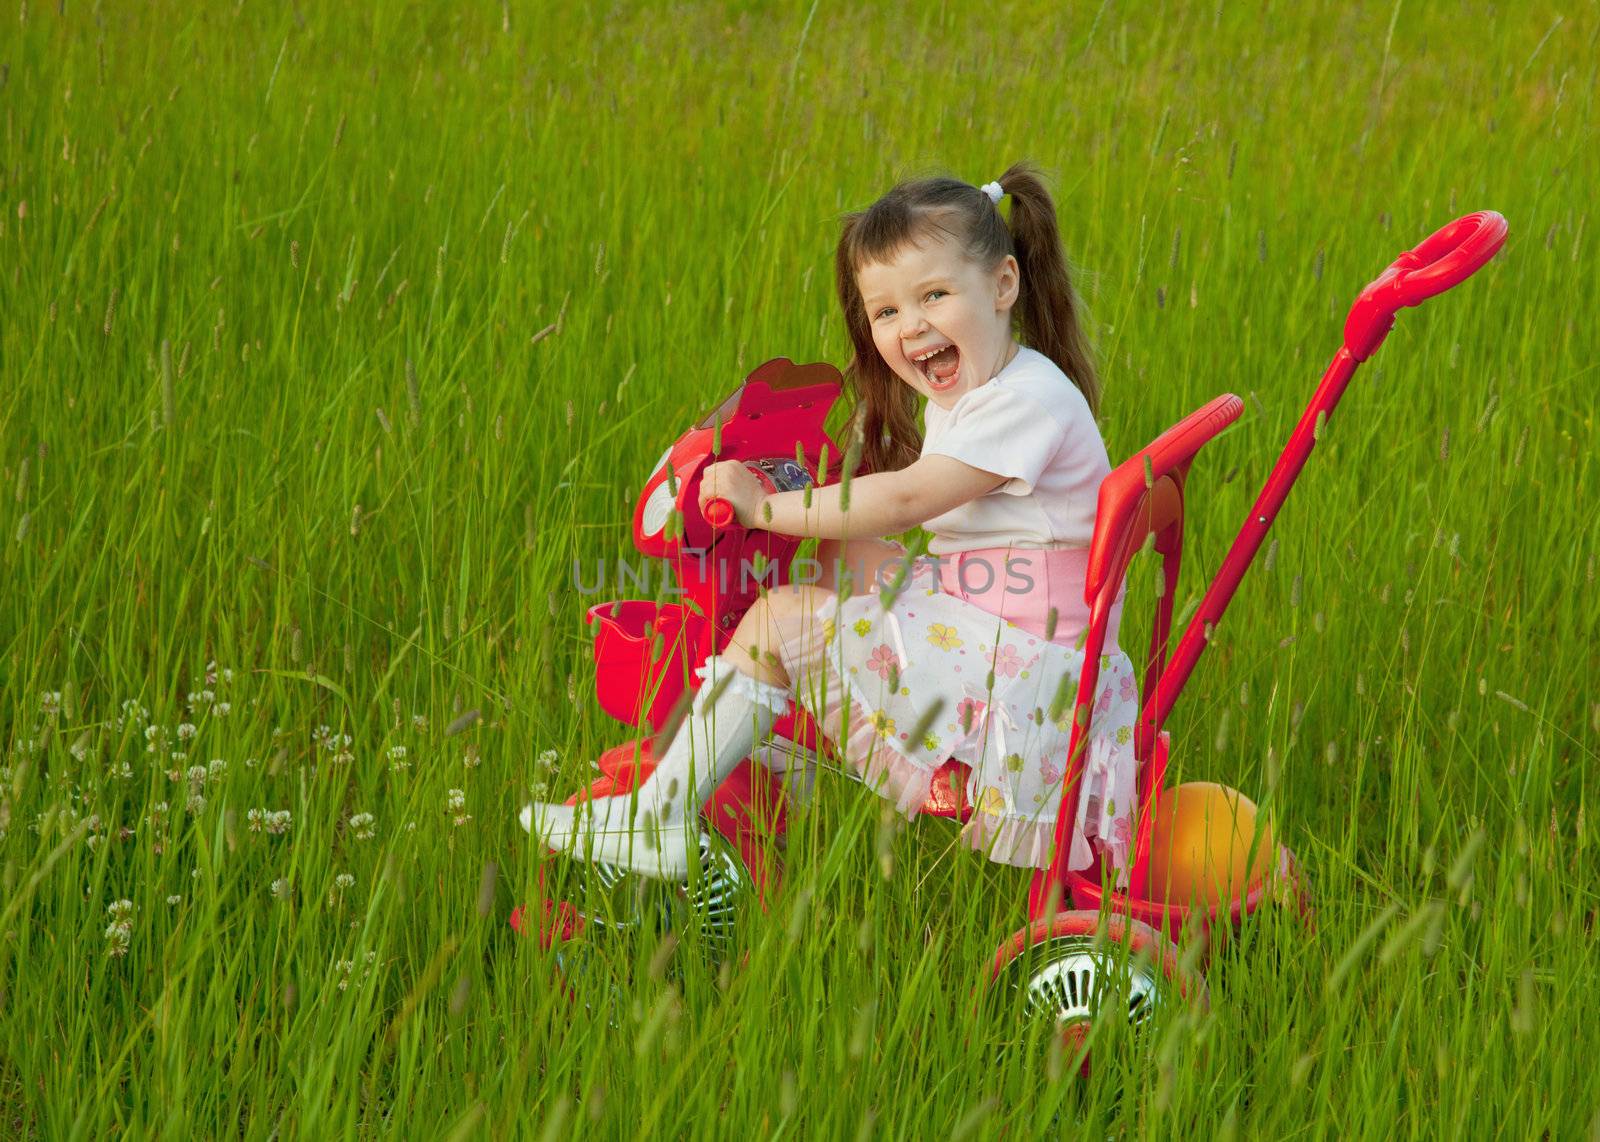 The cheerful little girl goes on a bicycle on a grass